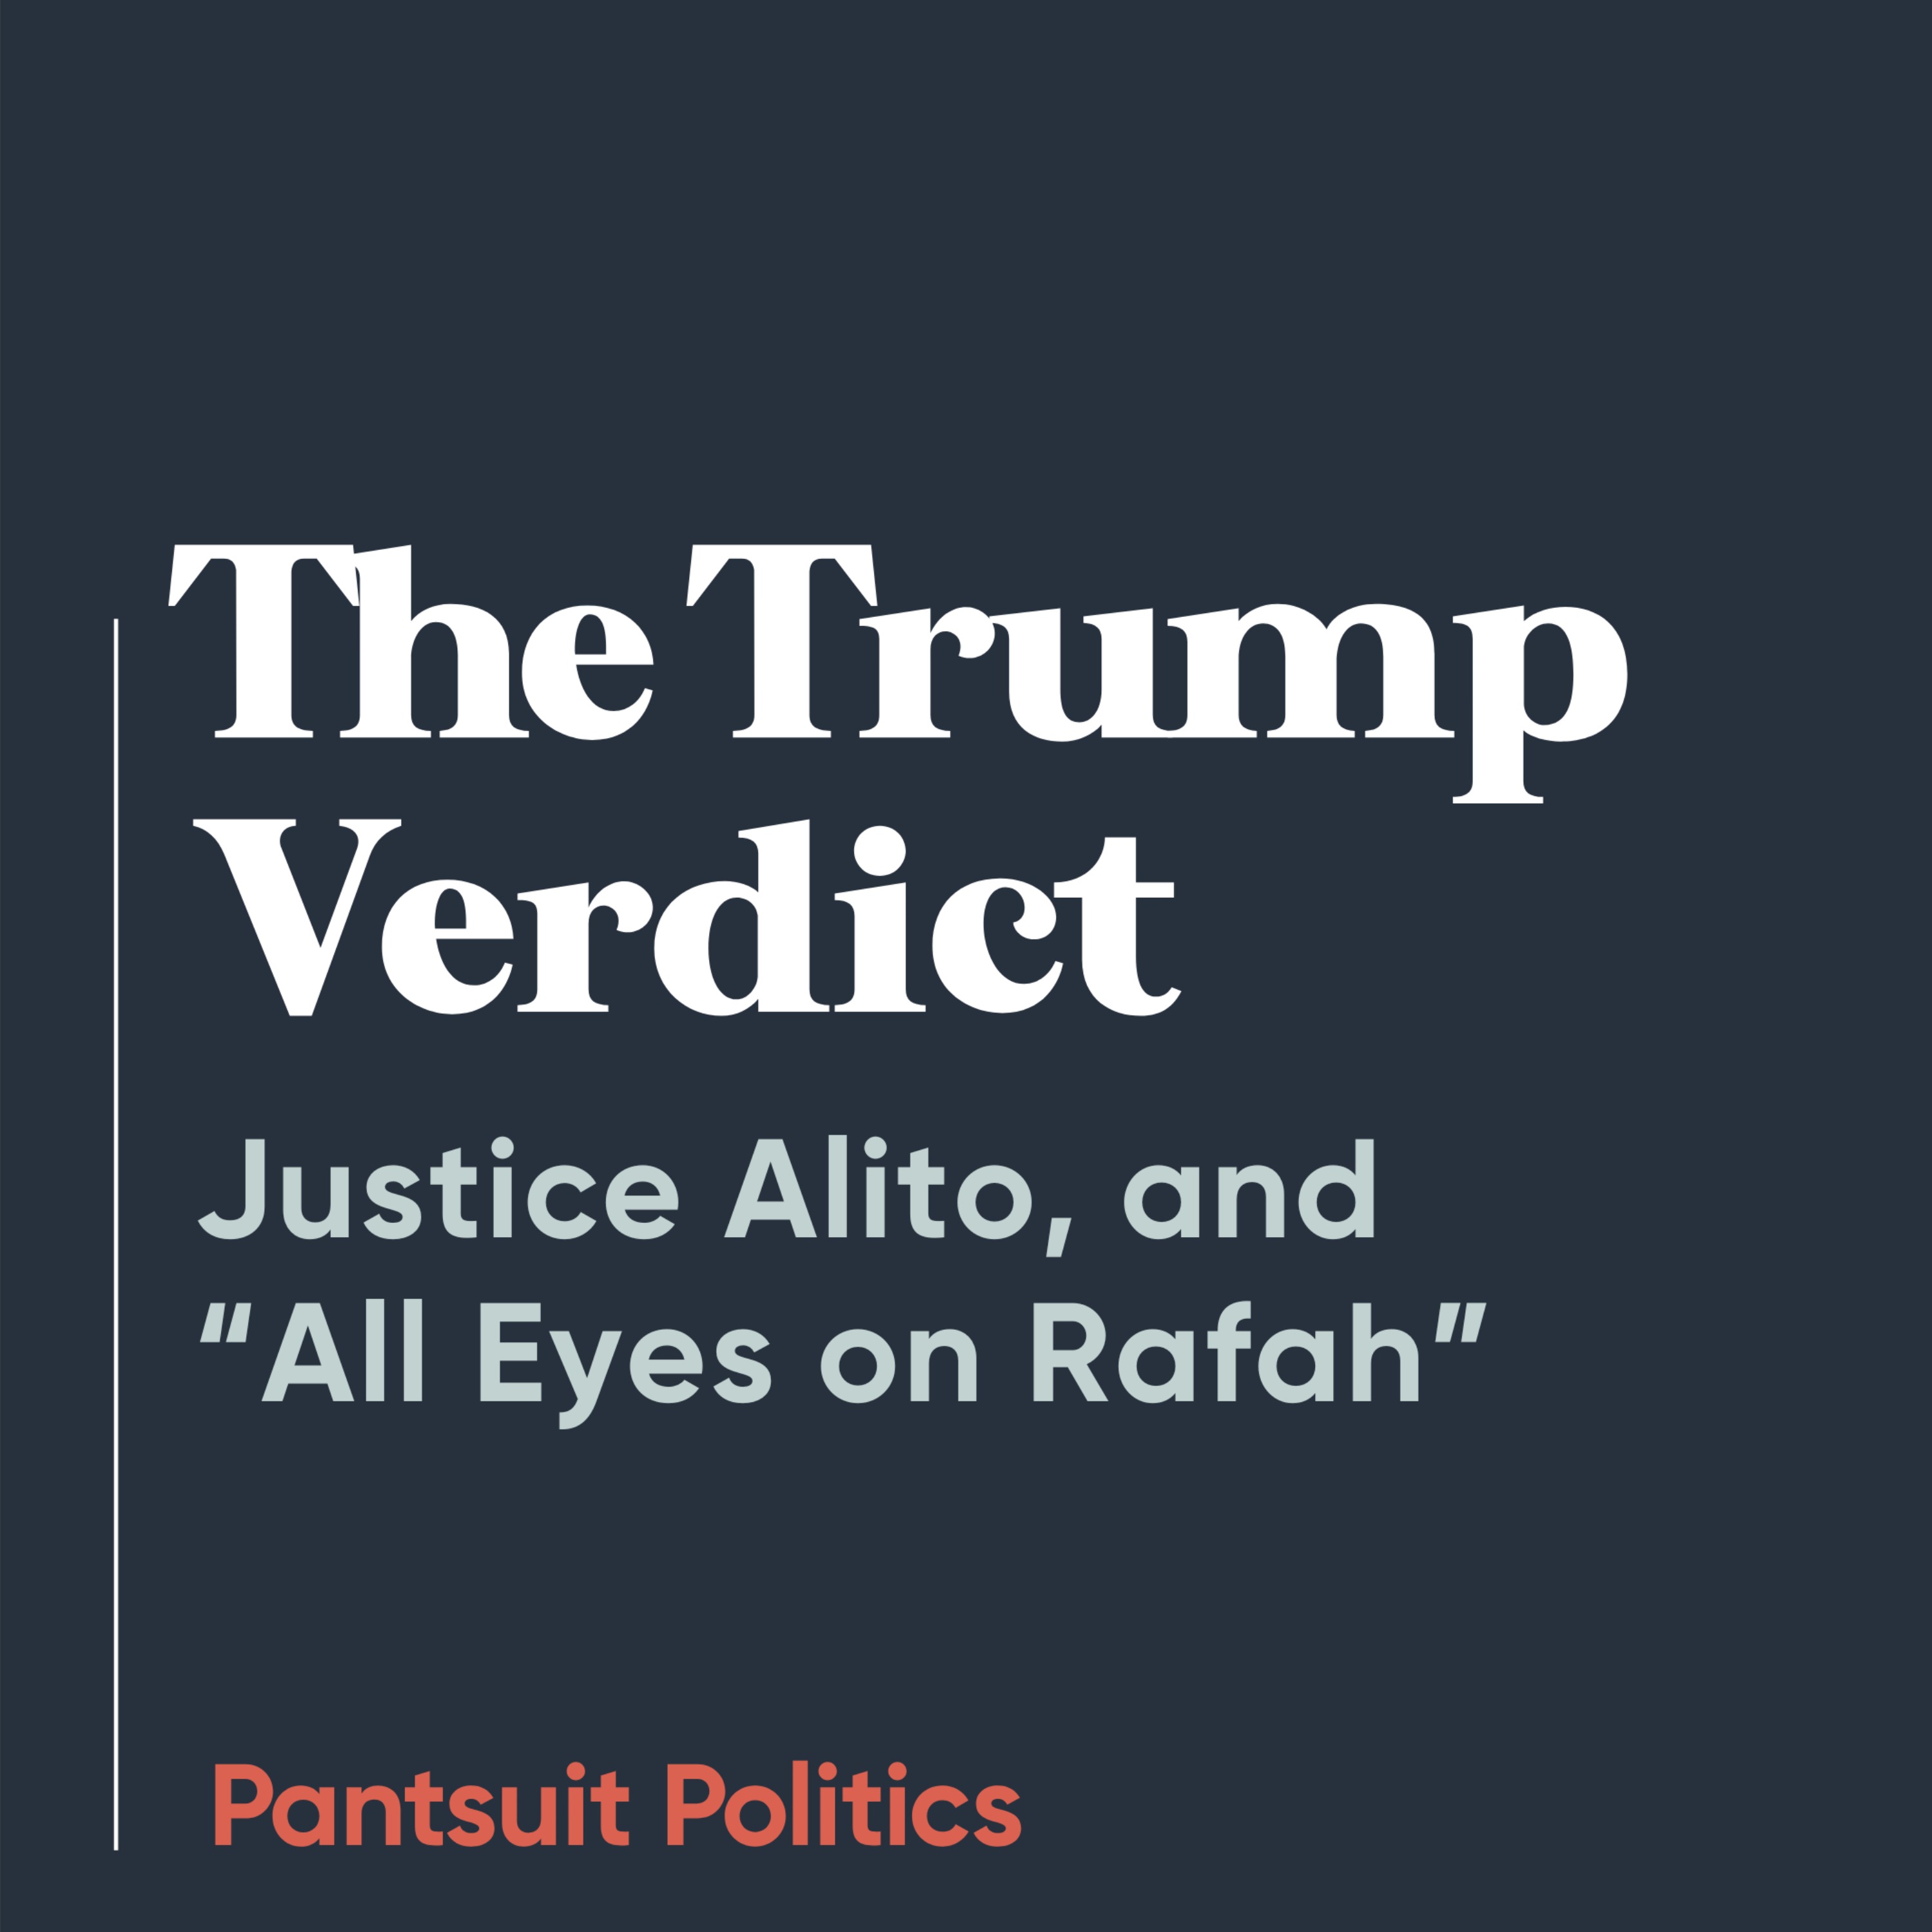 The Trump Verdict, Justice Alito, and “All Eyes on Rafah”